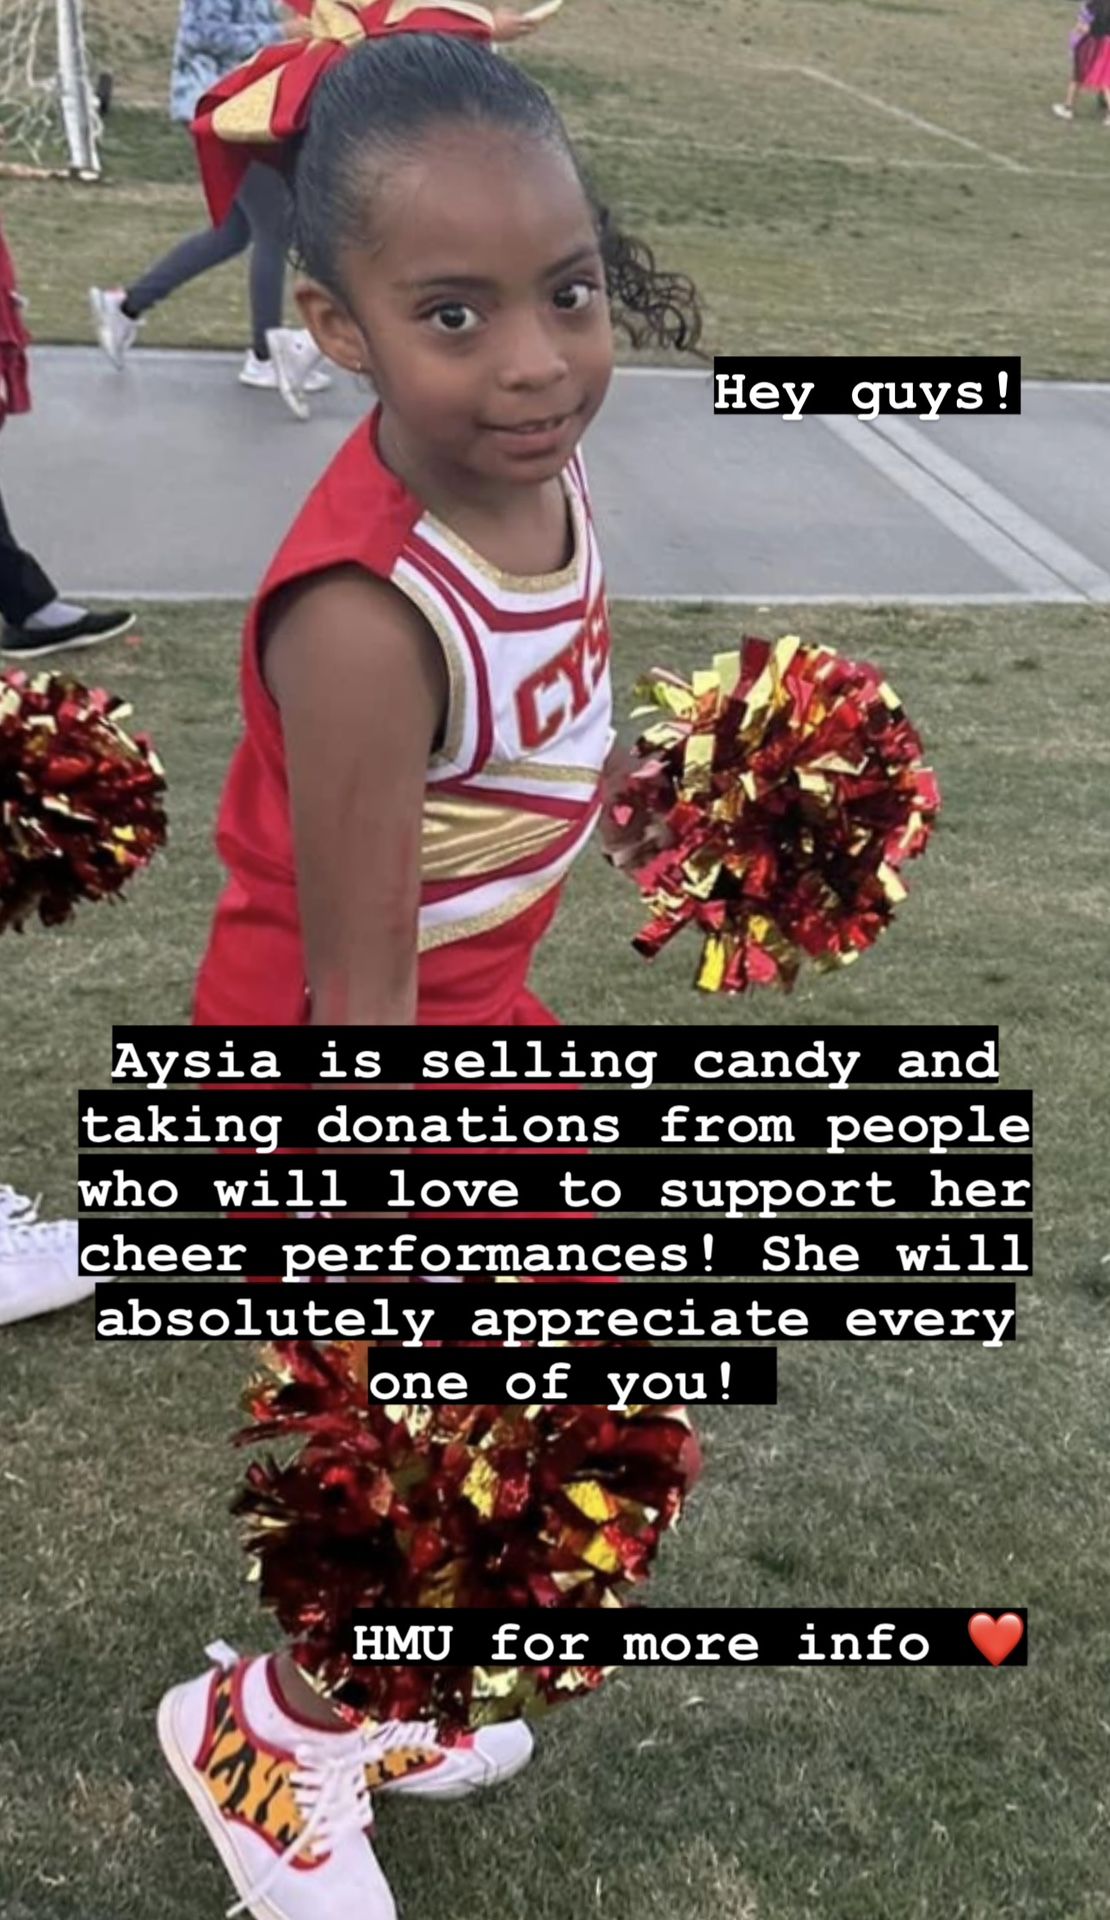 Please support my baby aysia get to her performances